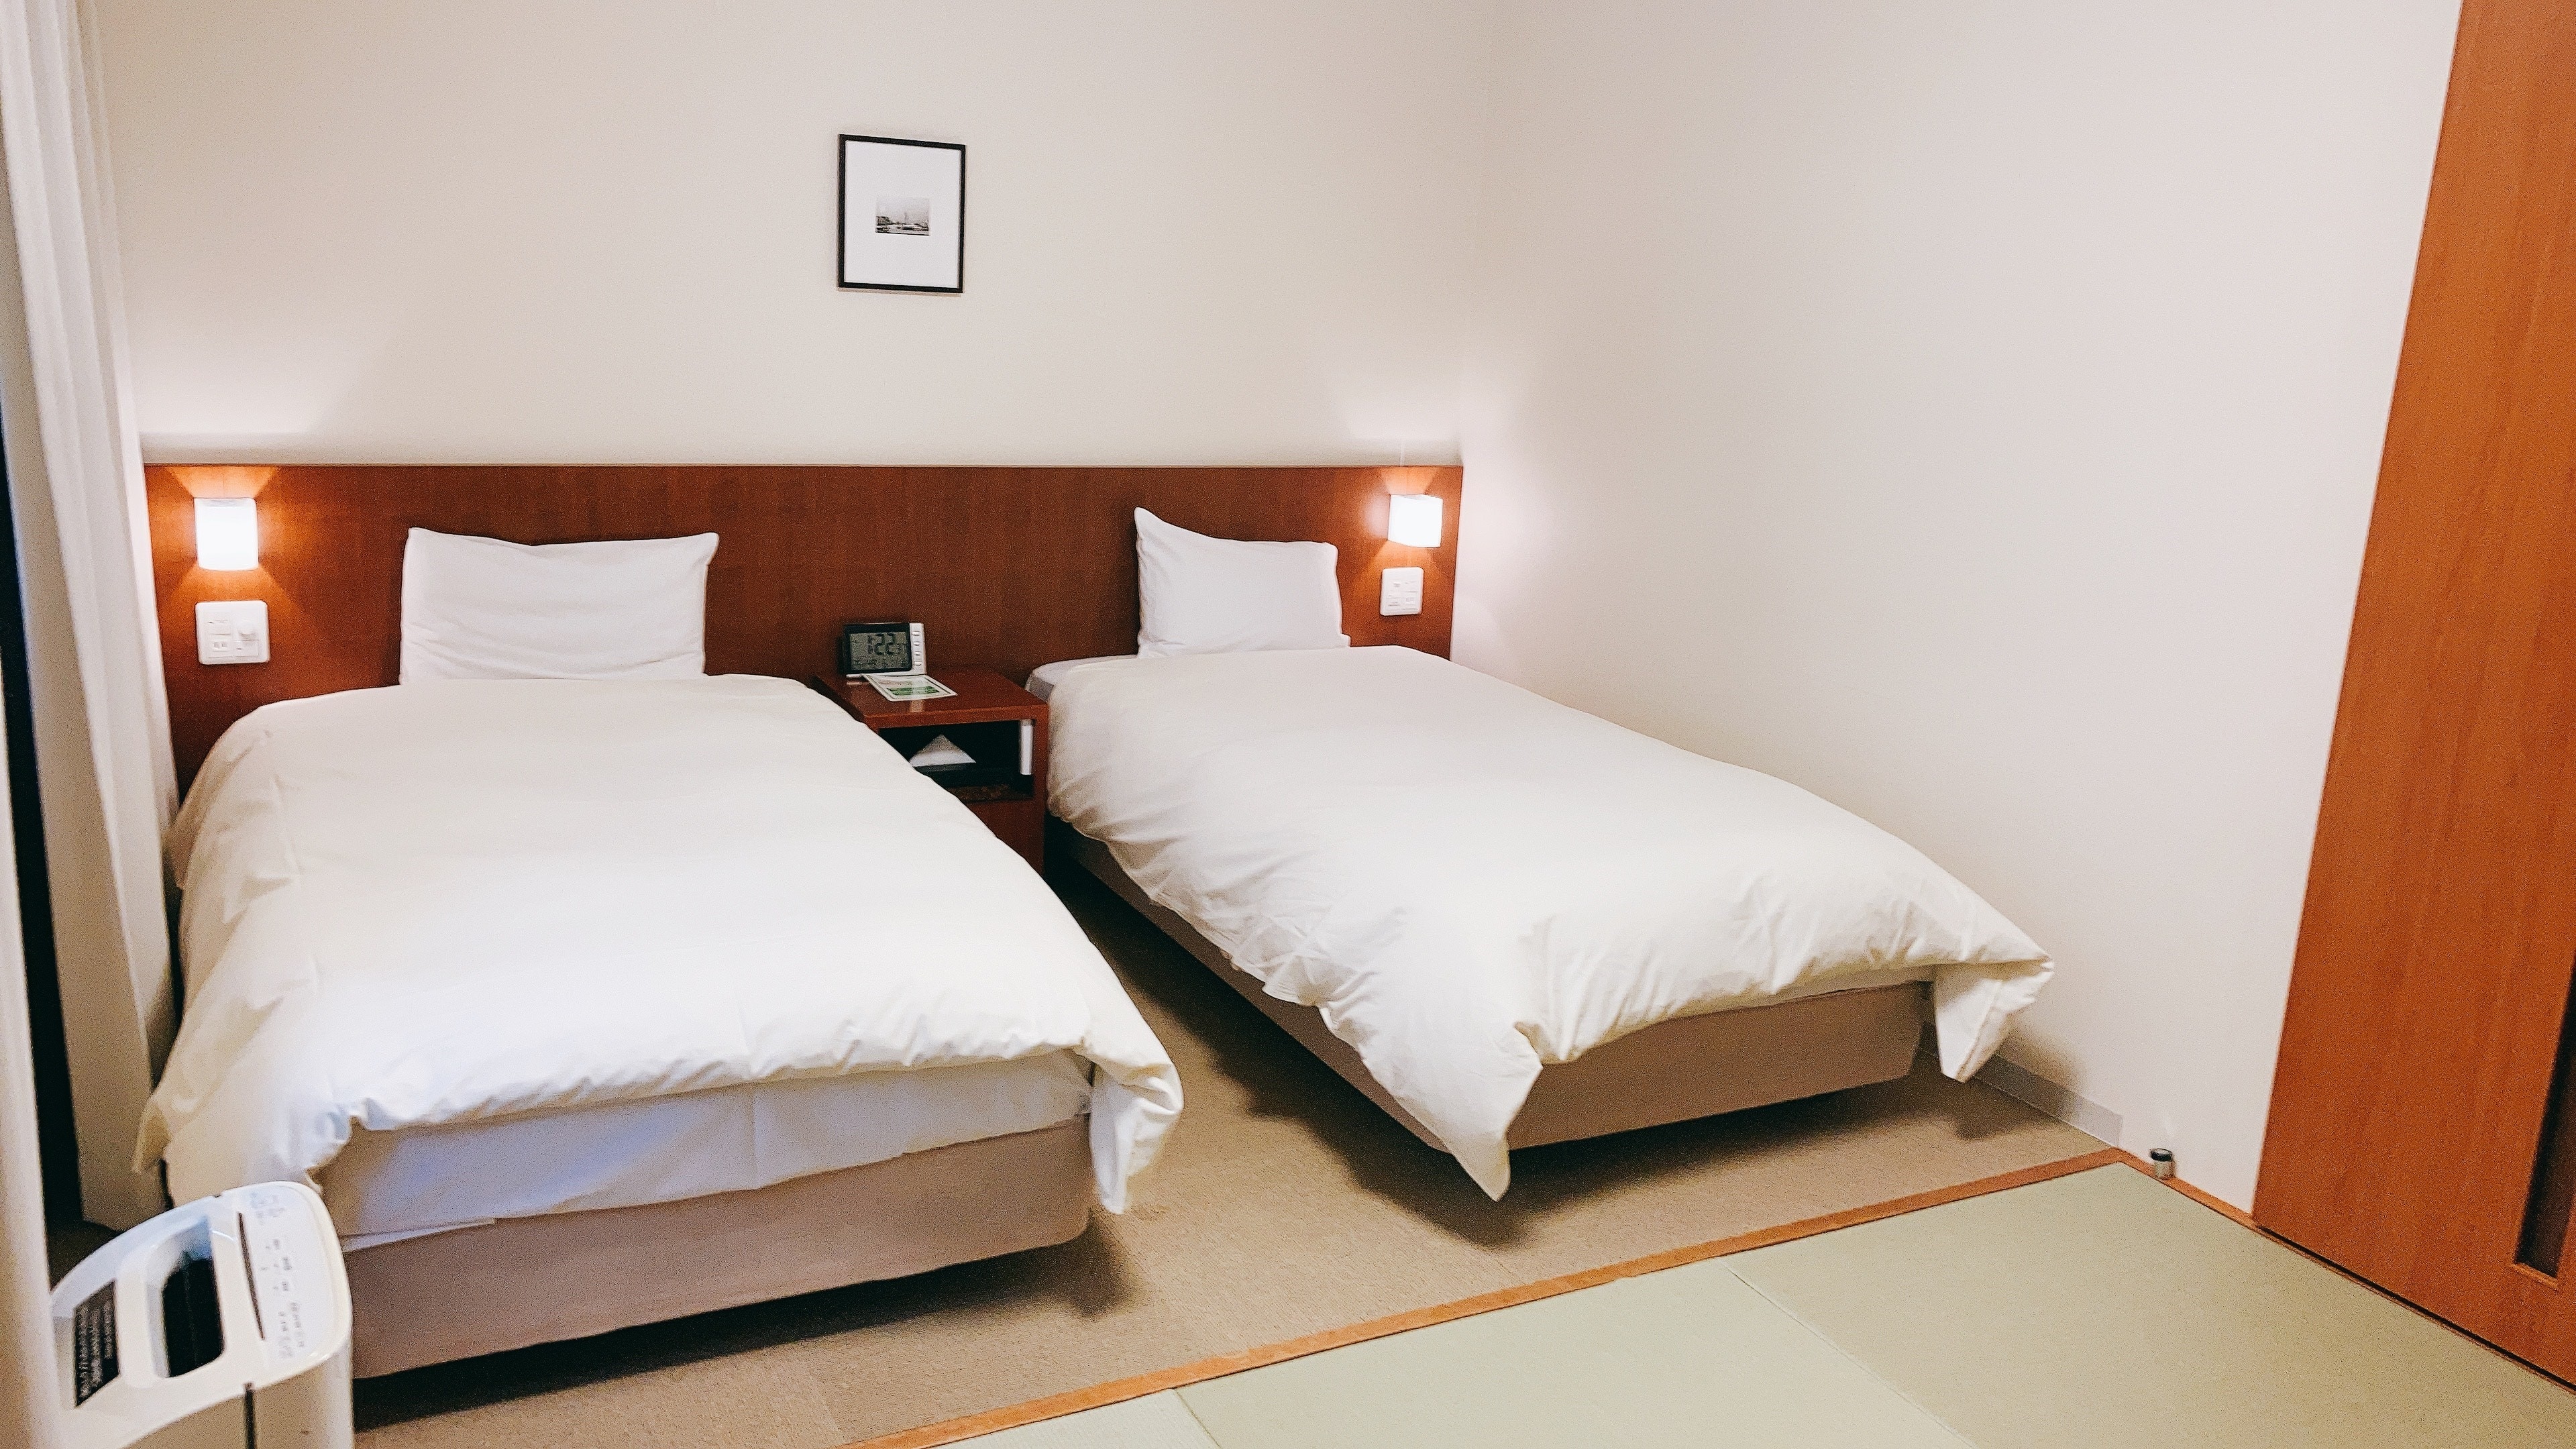 Japanese-Western style room 25.5 square meters for up to 4 people (2 beds, 2 futons), shower booth